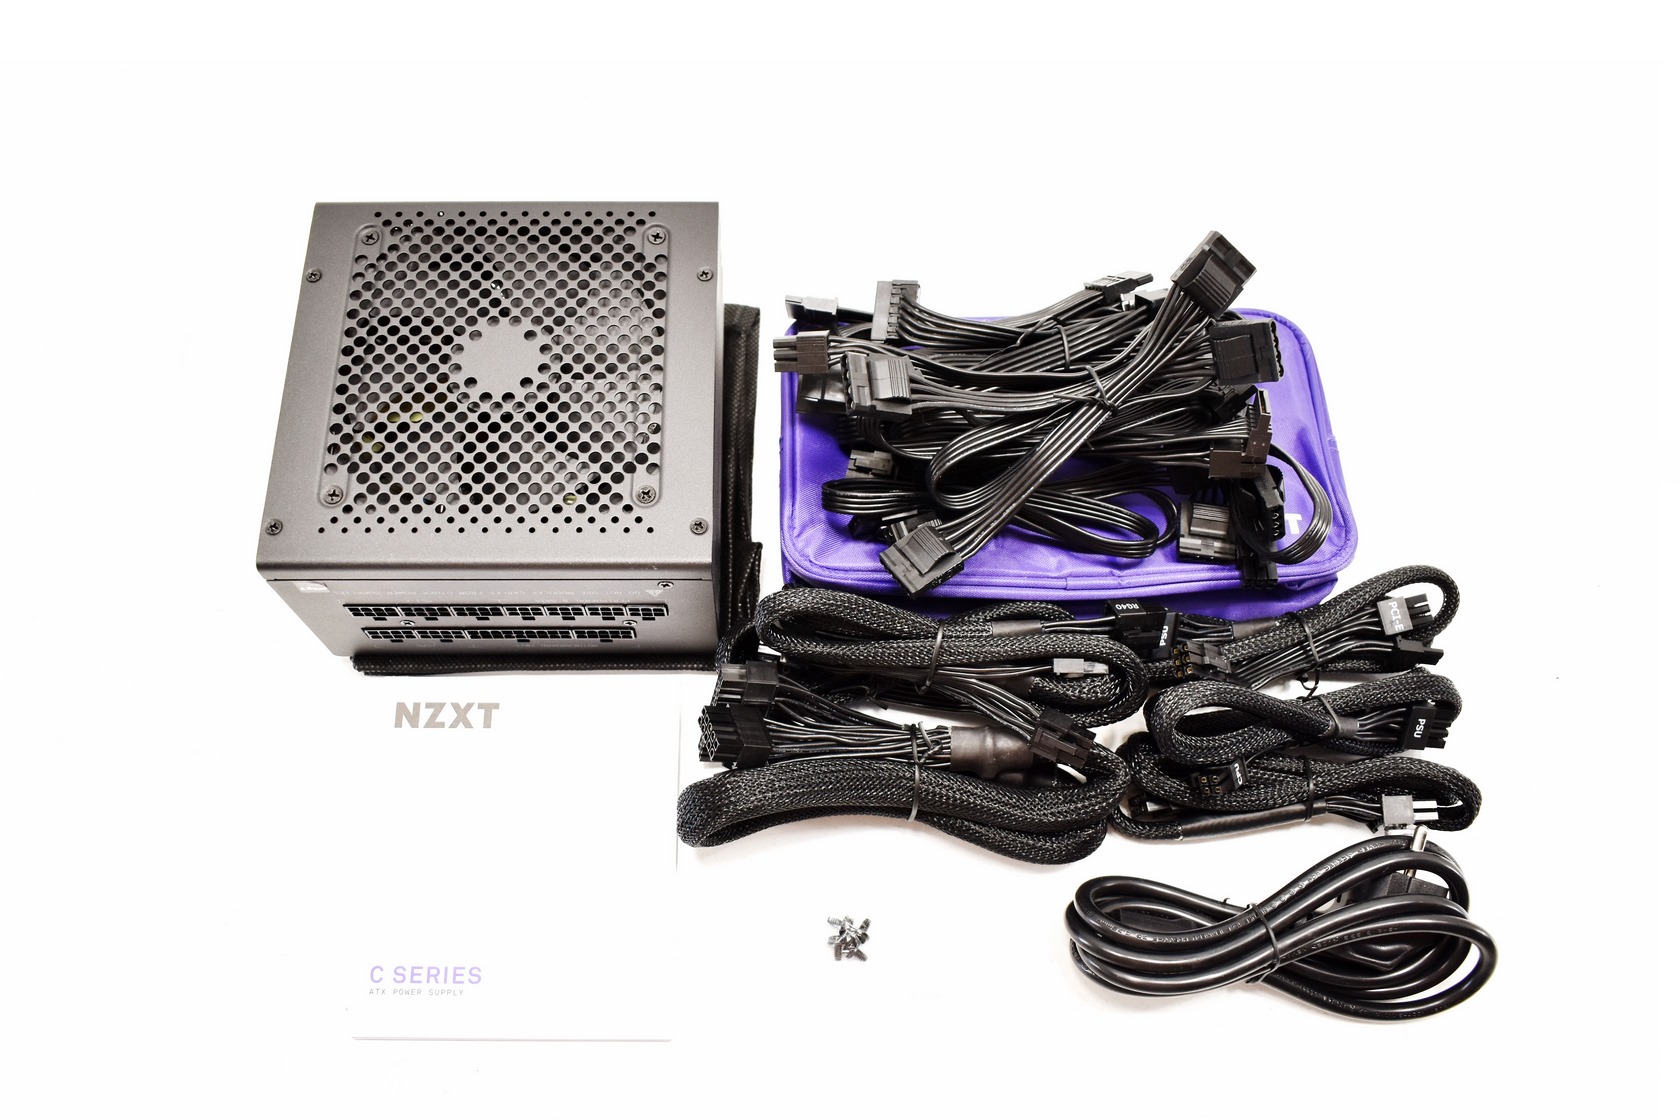 NZXT C850 Gold Power Supply Unit Review